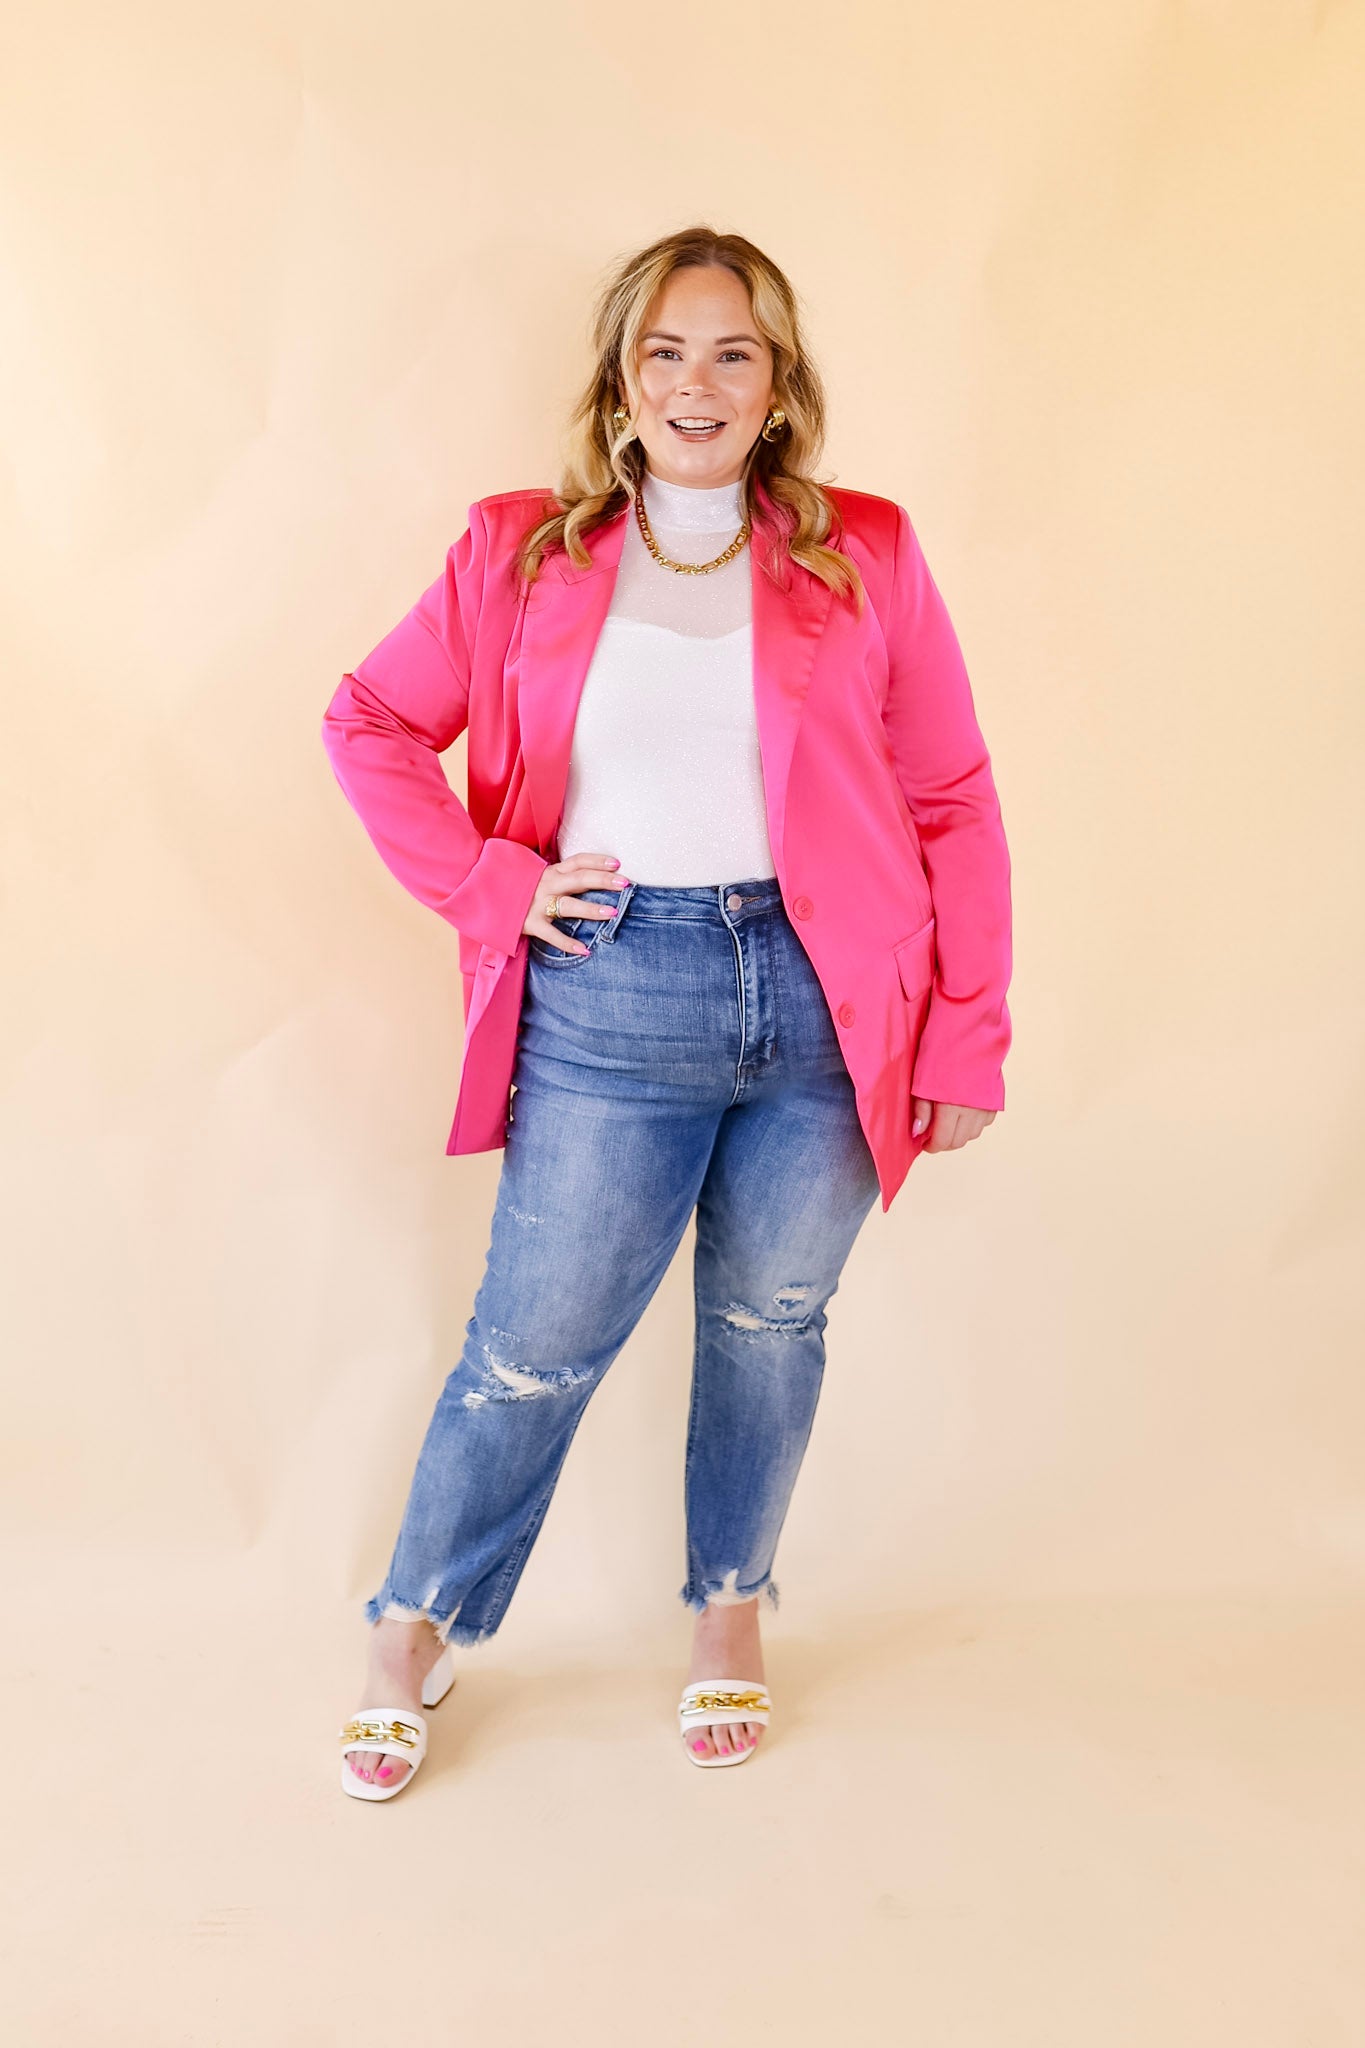 Touch Of Luxury Long Sleeve Satin Blazer in Hot Pink - Giddy Up Glamour Boutique